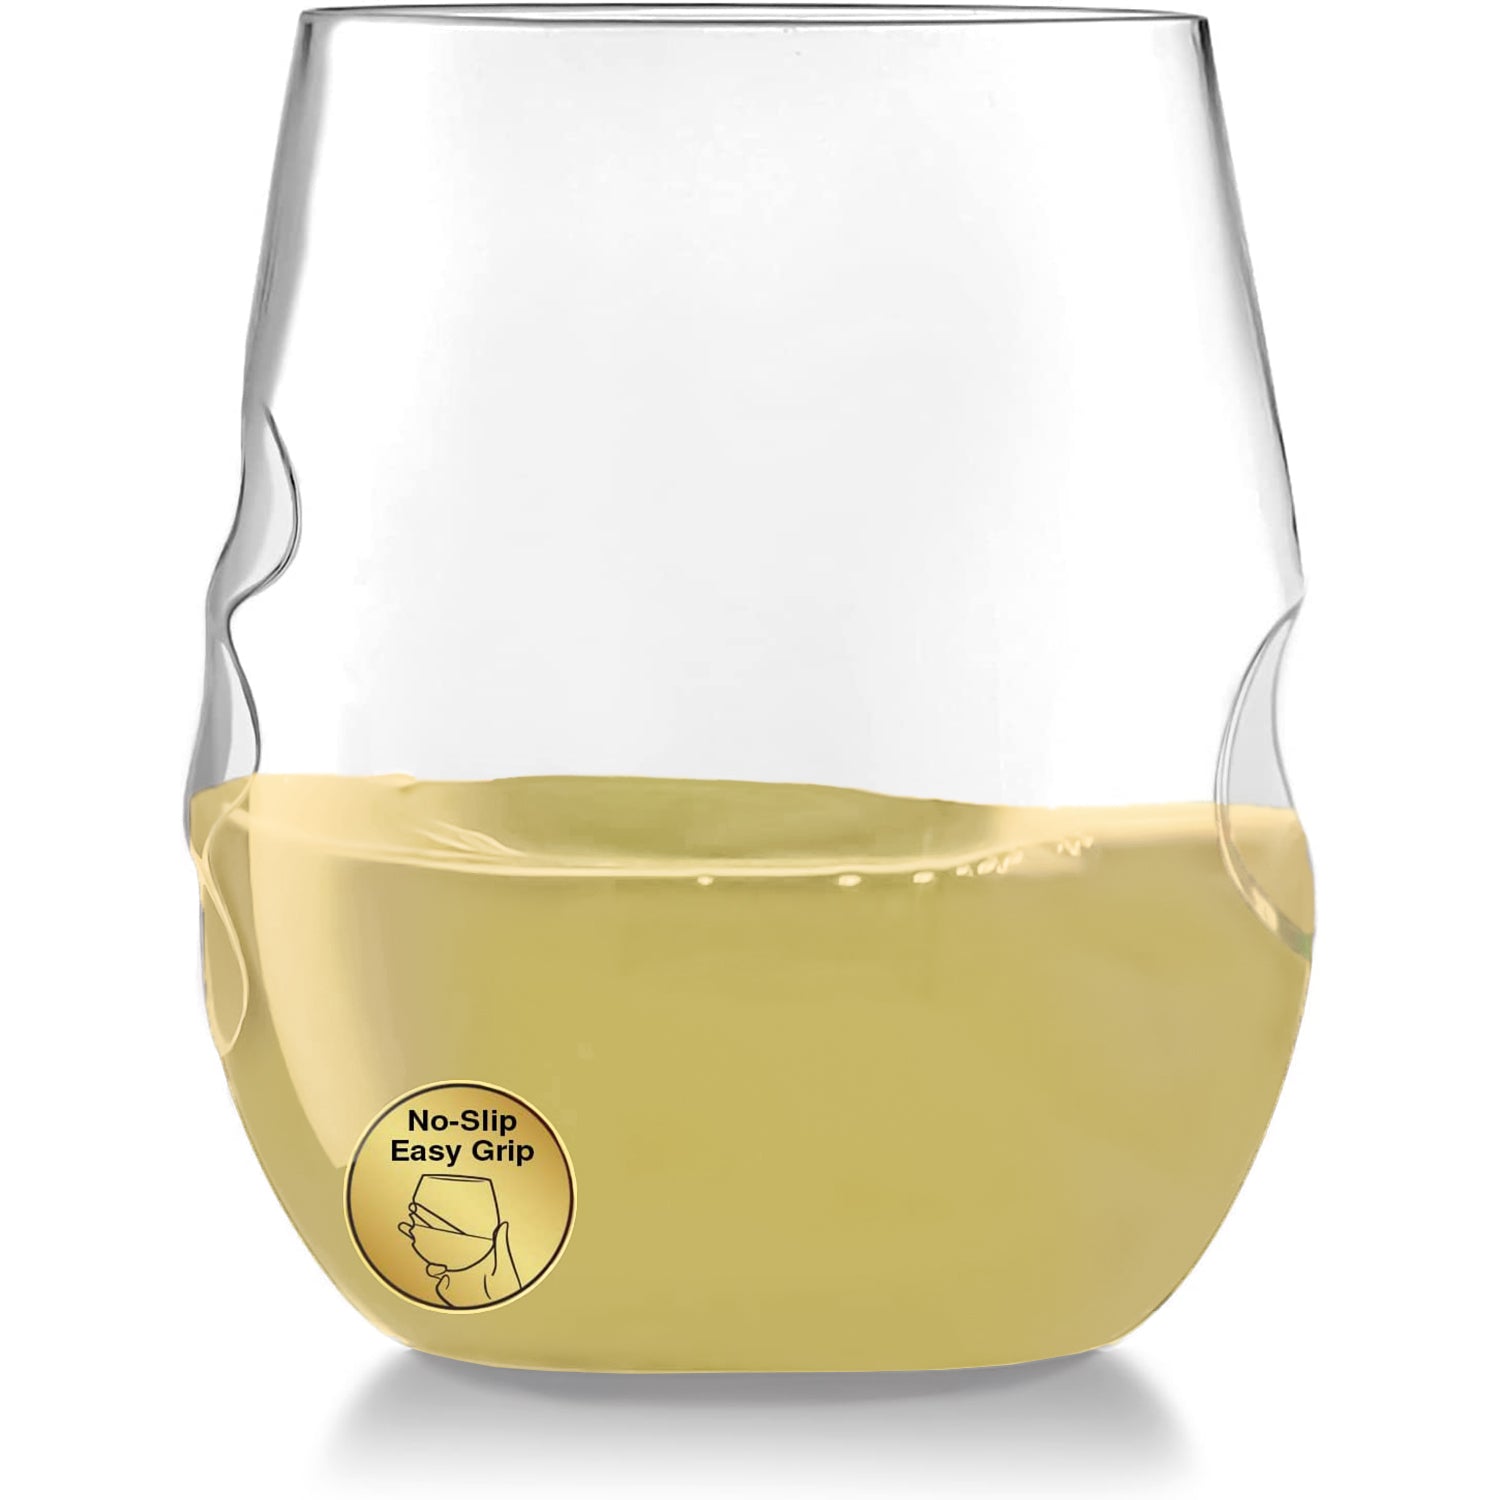 Smarty Had A Party 12 oz. Clear Elegant Stemless Plastic Wine Glasses (64 Glasses)